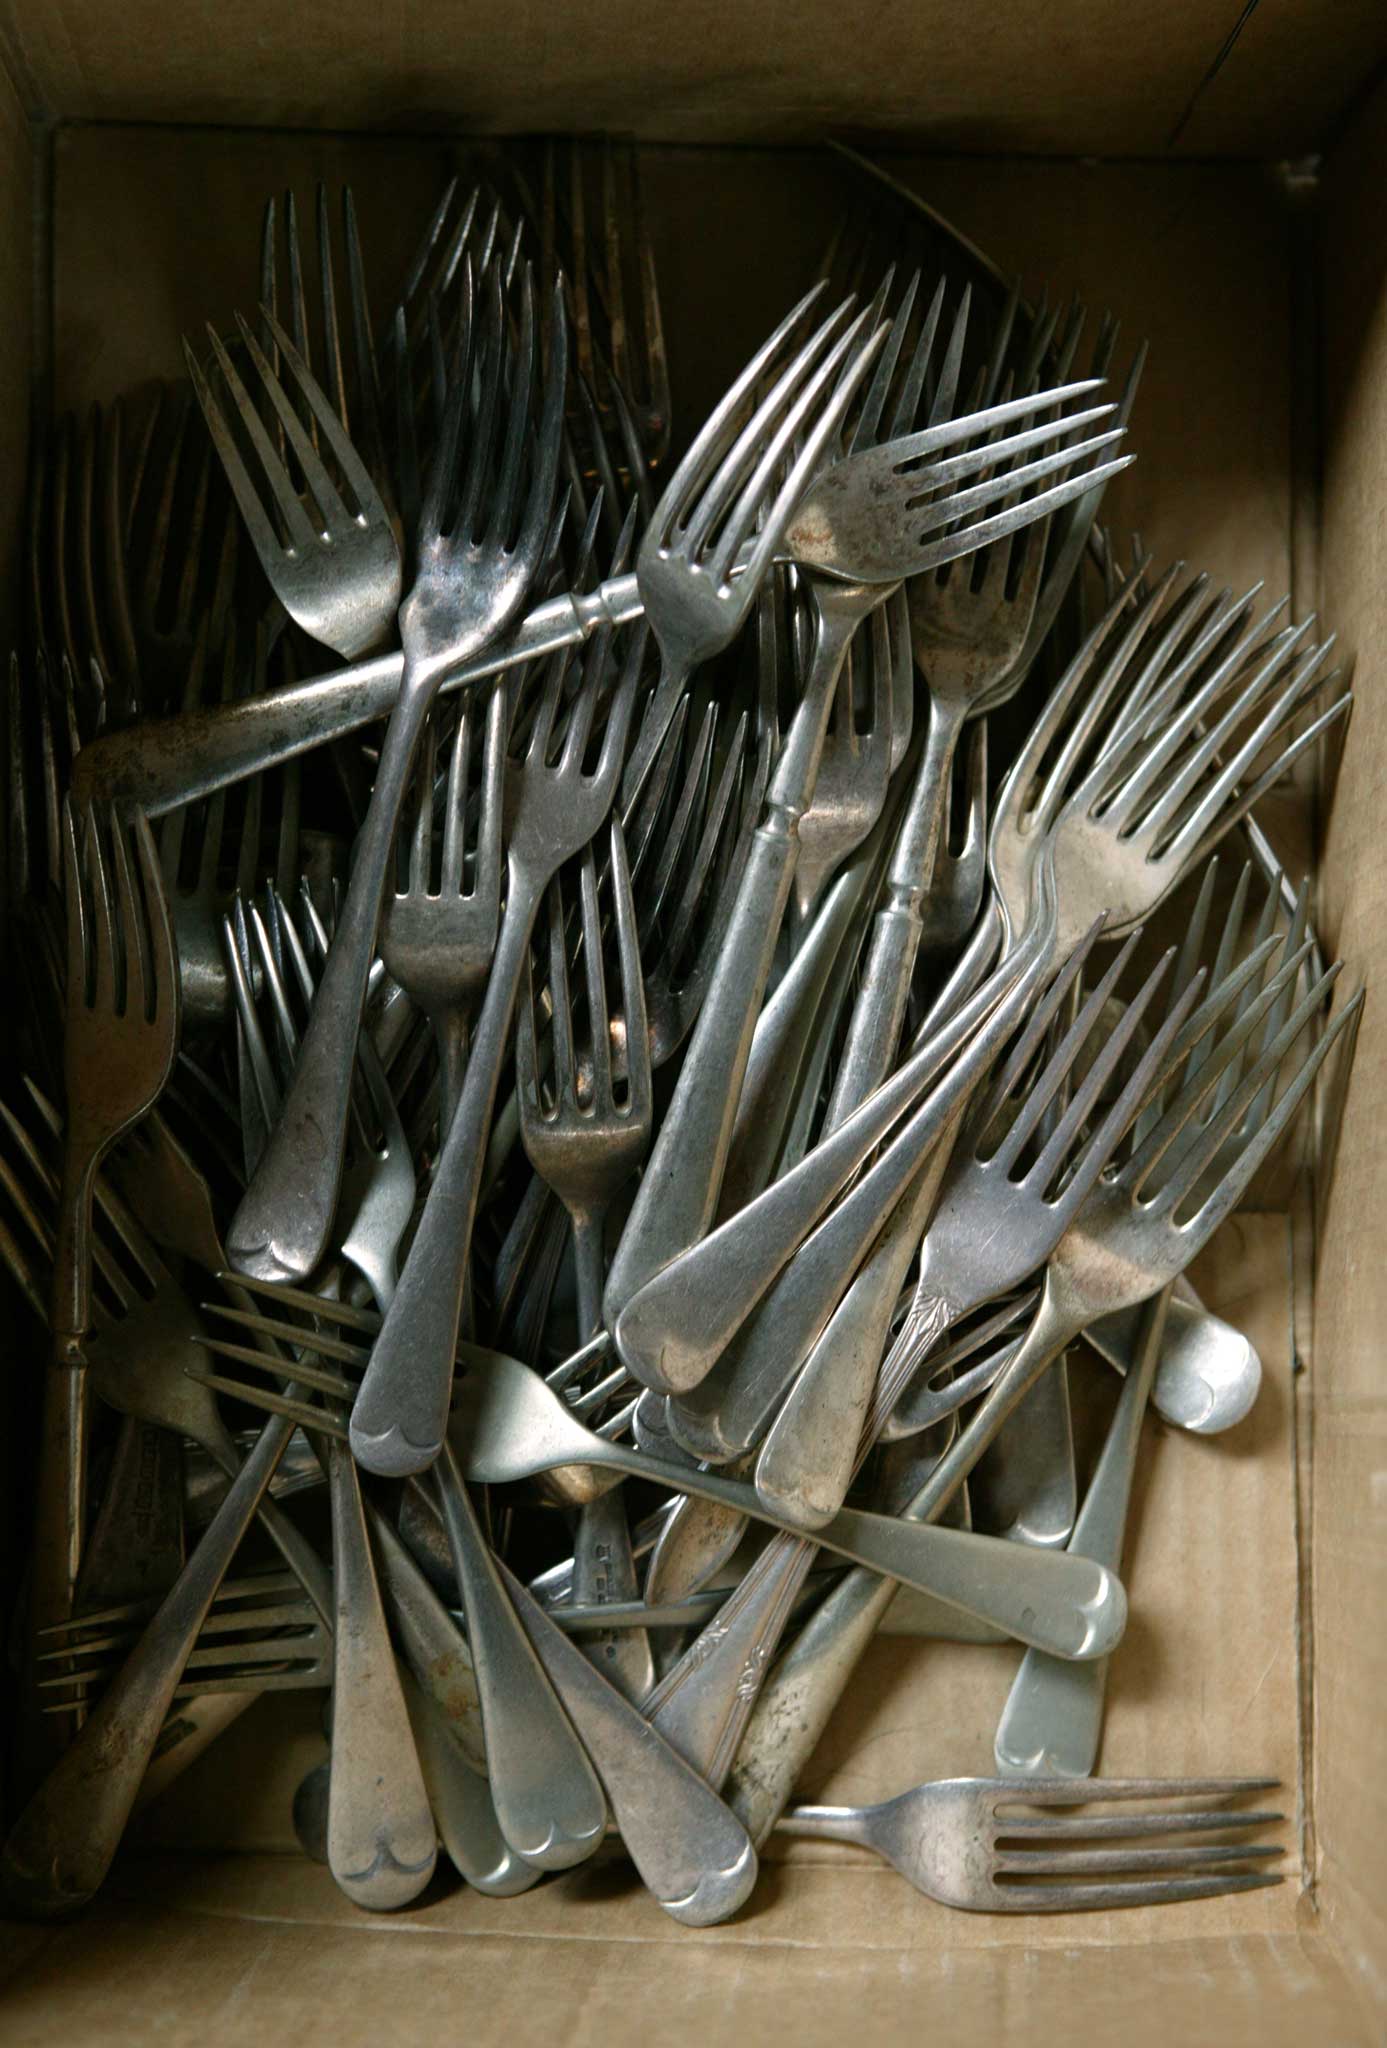 Tools of the trade: Old silver-plated forks